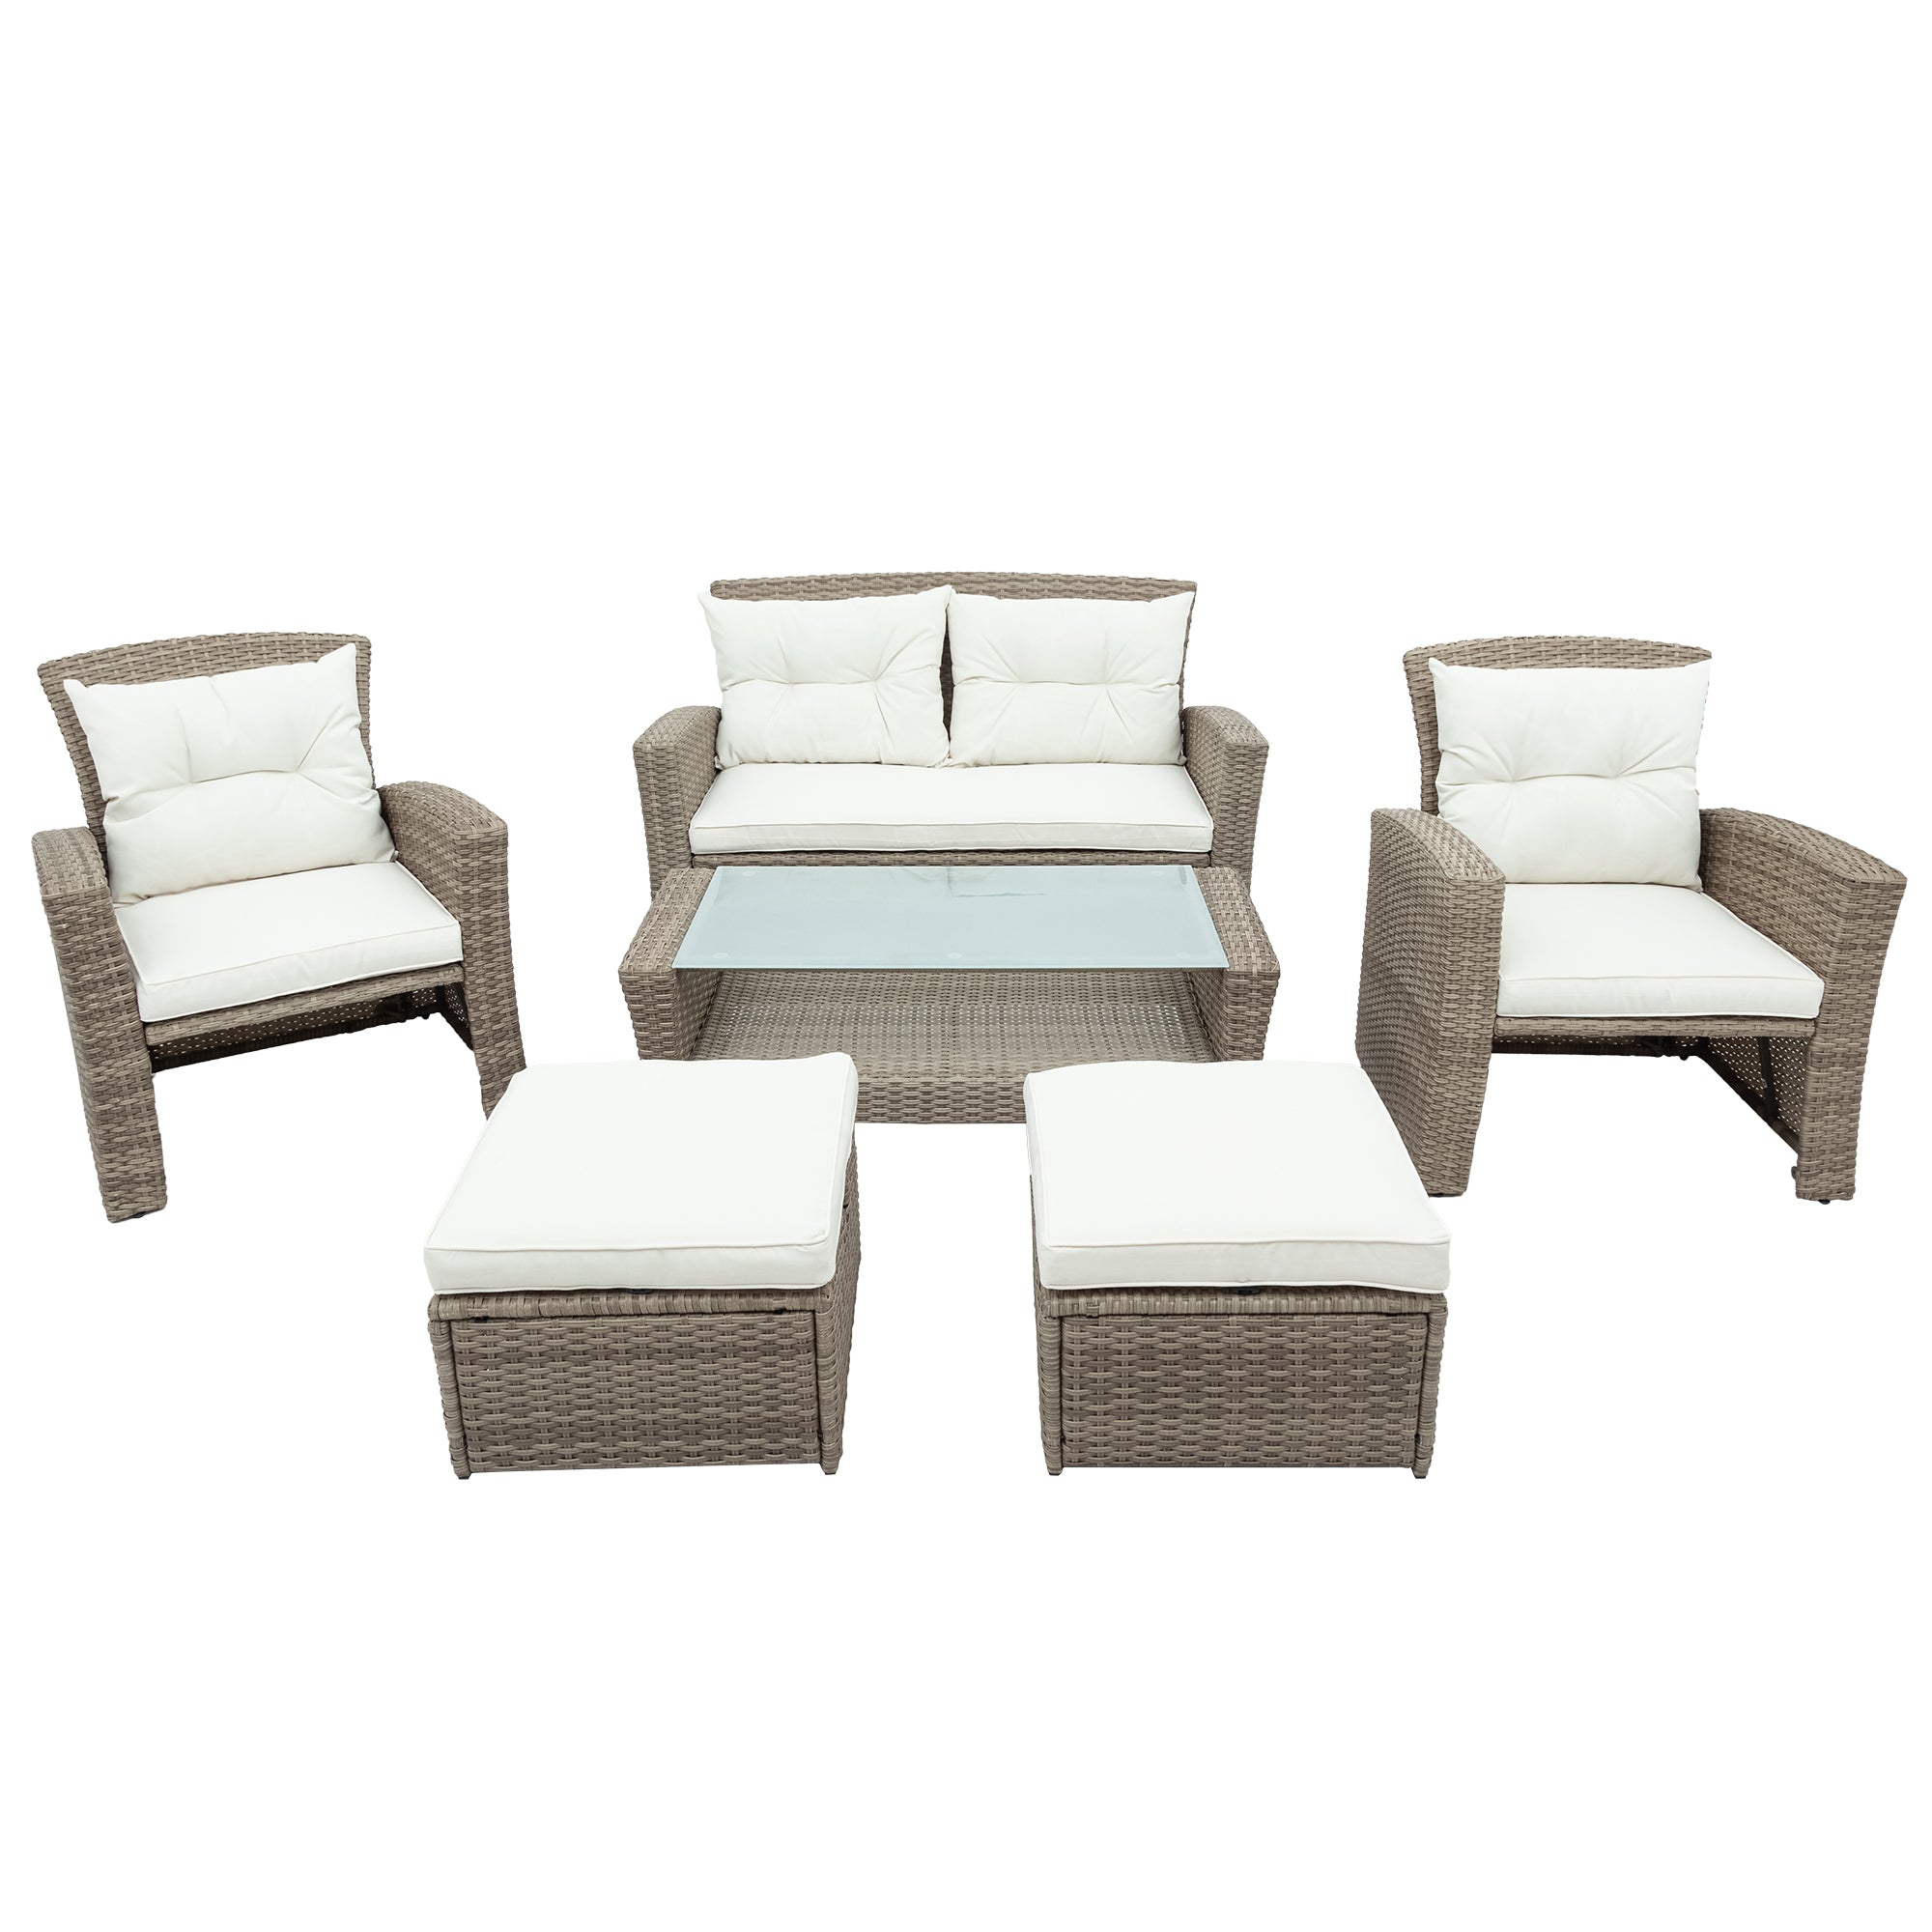 U-Style Patio Furniture Set: 4-Piece Outdoor Conversation Set with All-Weather Wicker Sectional Sofa, Ottoman, and Cushions | Perfect for Your Outdoor Space